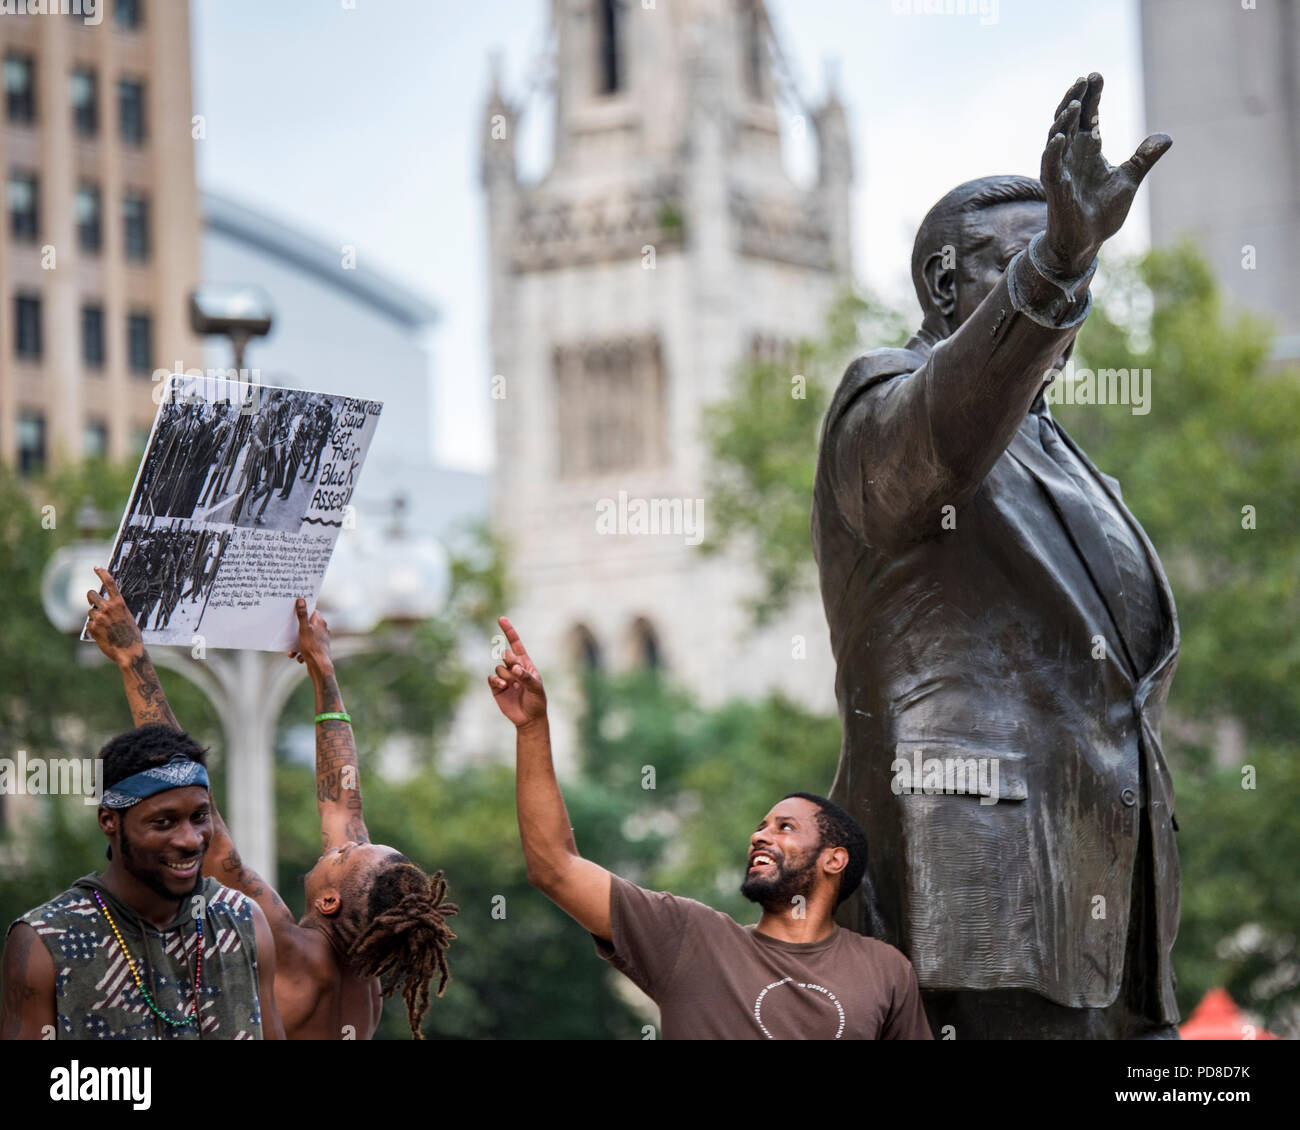 Philadelphia, Pennsylvania / USA. Philly for REAL Justice members hold a weekly protest in front of the statue of former Philadelphia police chief, Frank Rizzo. The organization highlighted the former police chief's record of brutality towards the Black community and is calling for the statue to be removed. August 07 2018. Credit: Christopher Evens/Alamy Live News Stock Photo